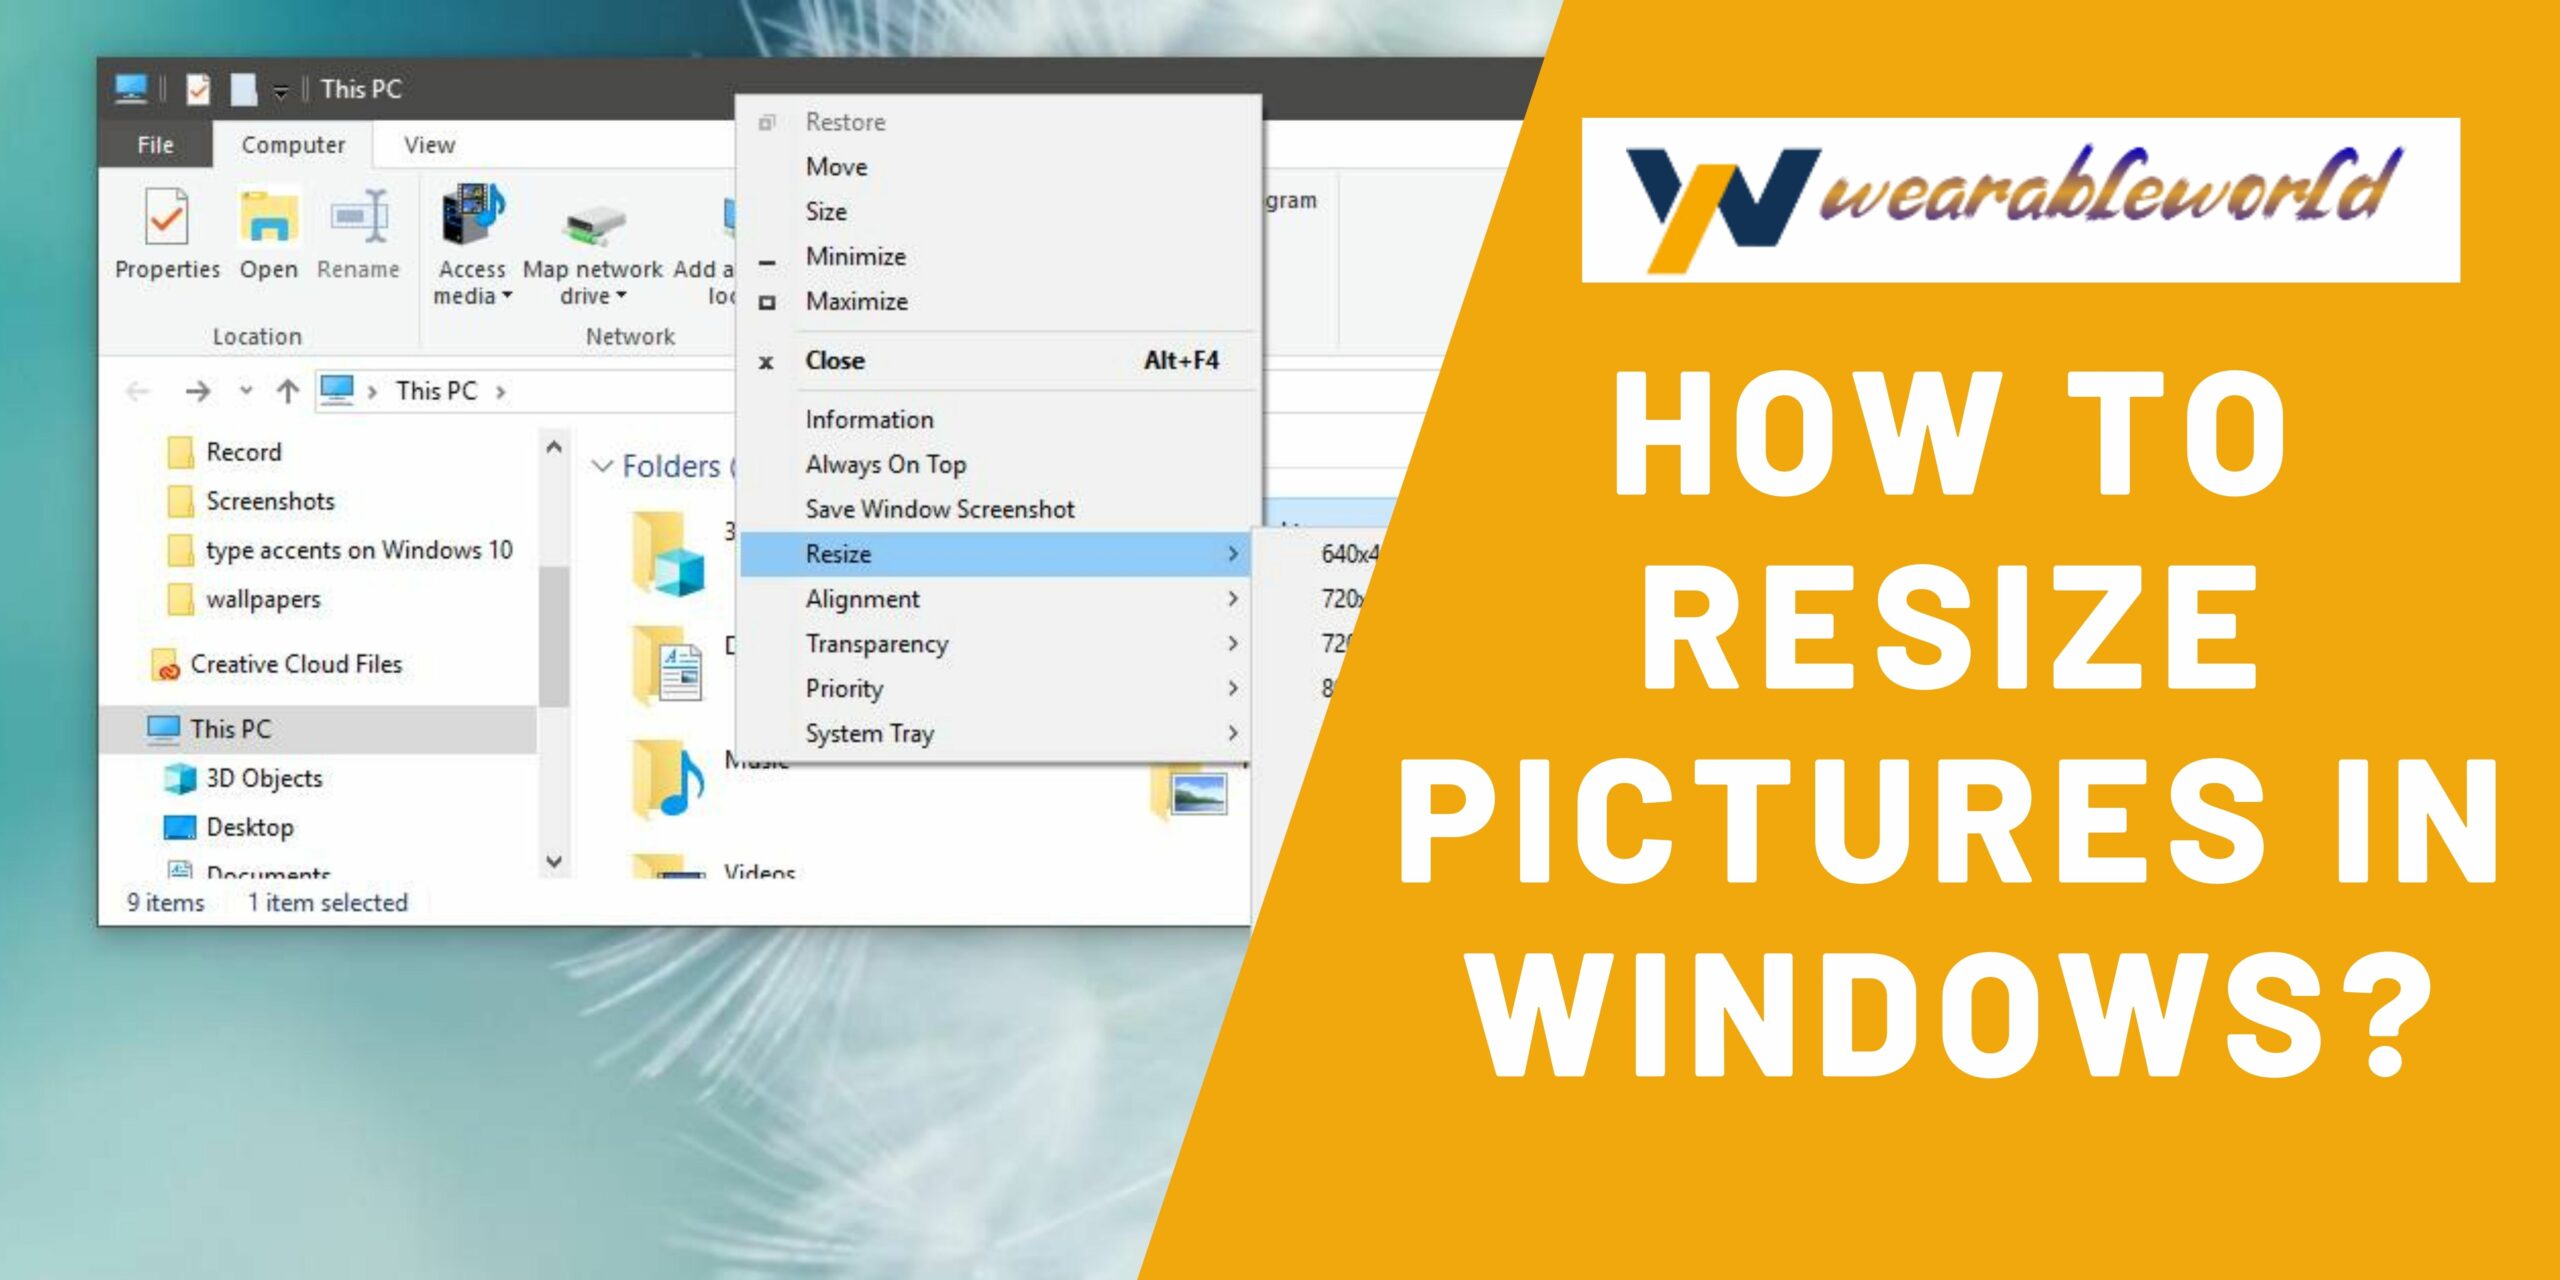 Resize pictures in Windows